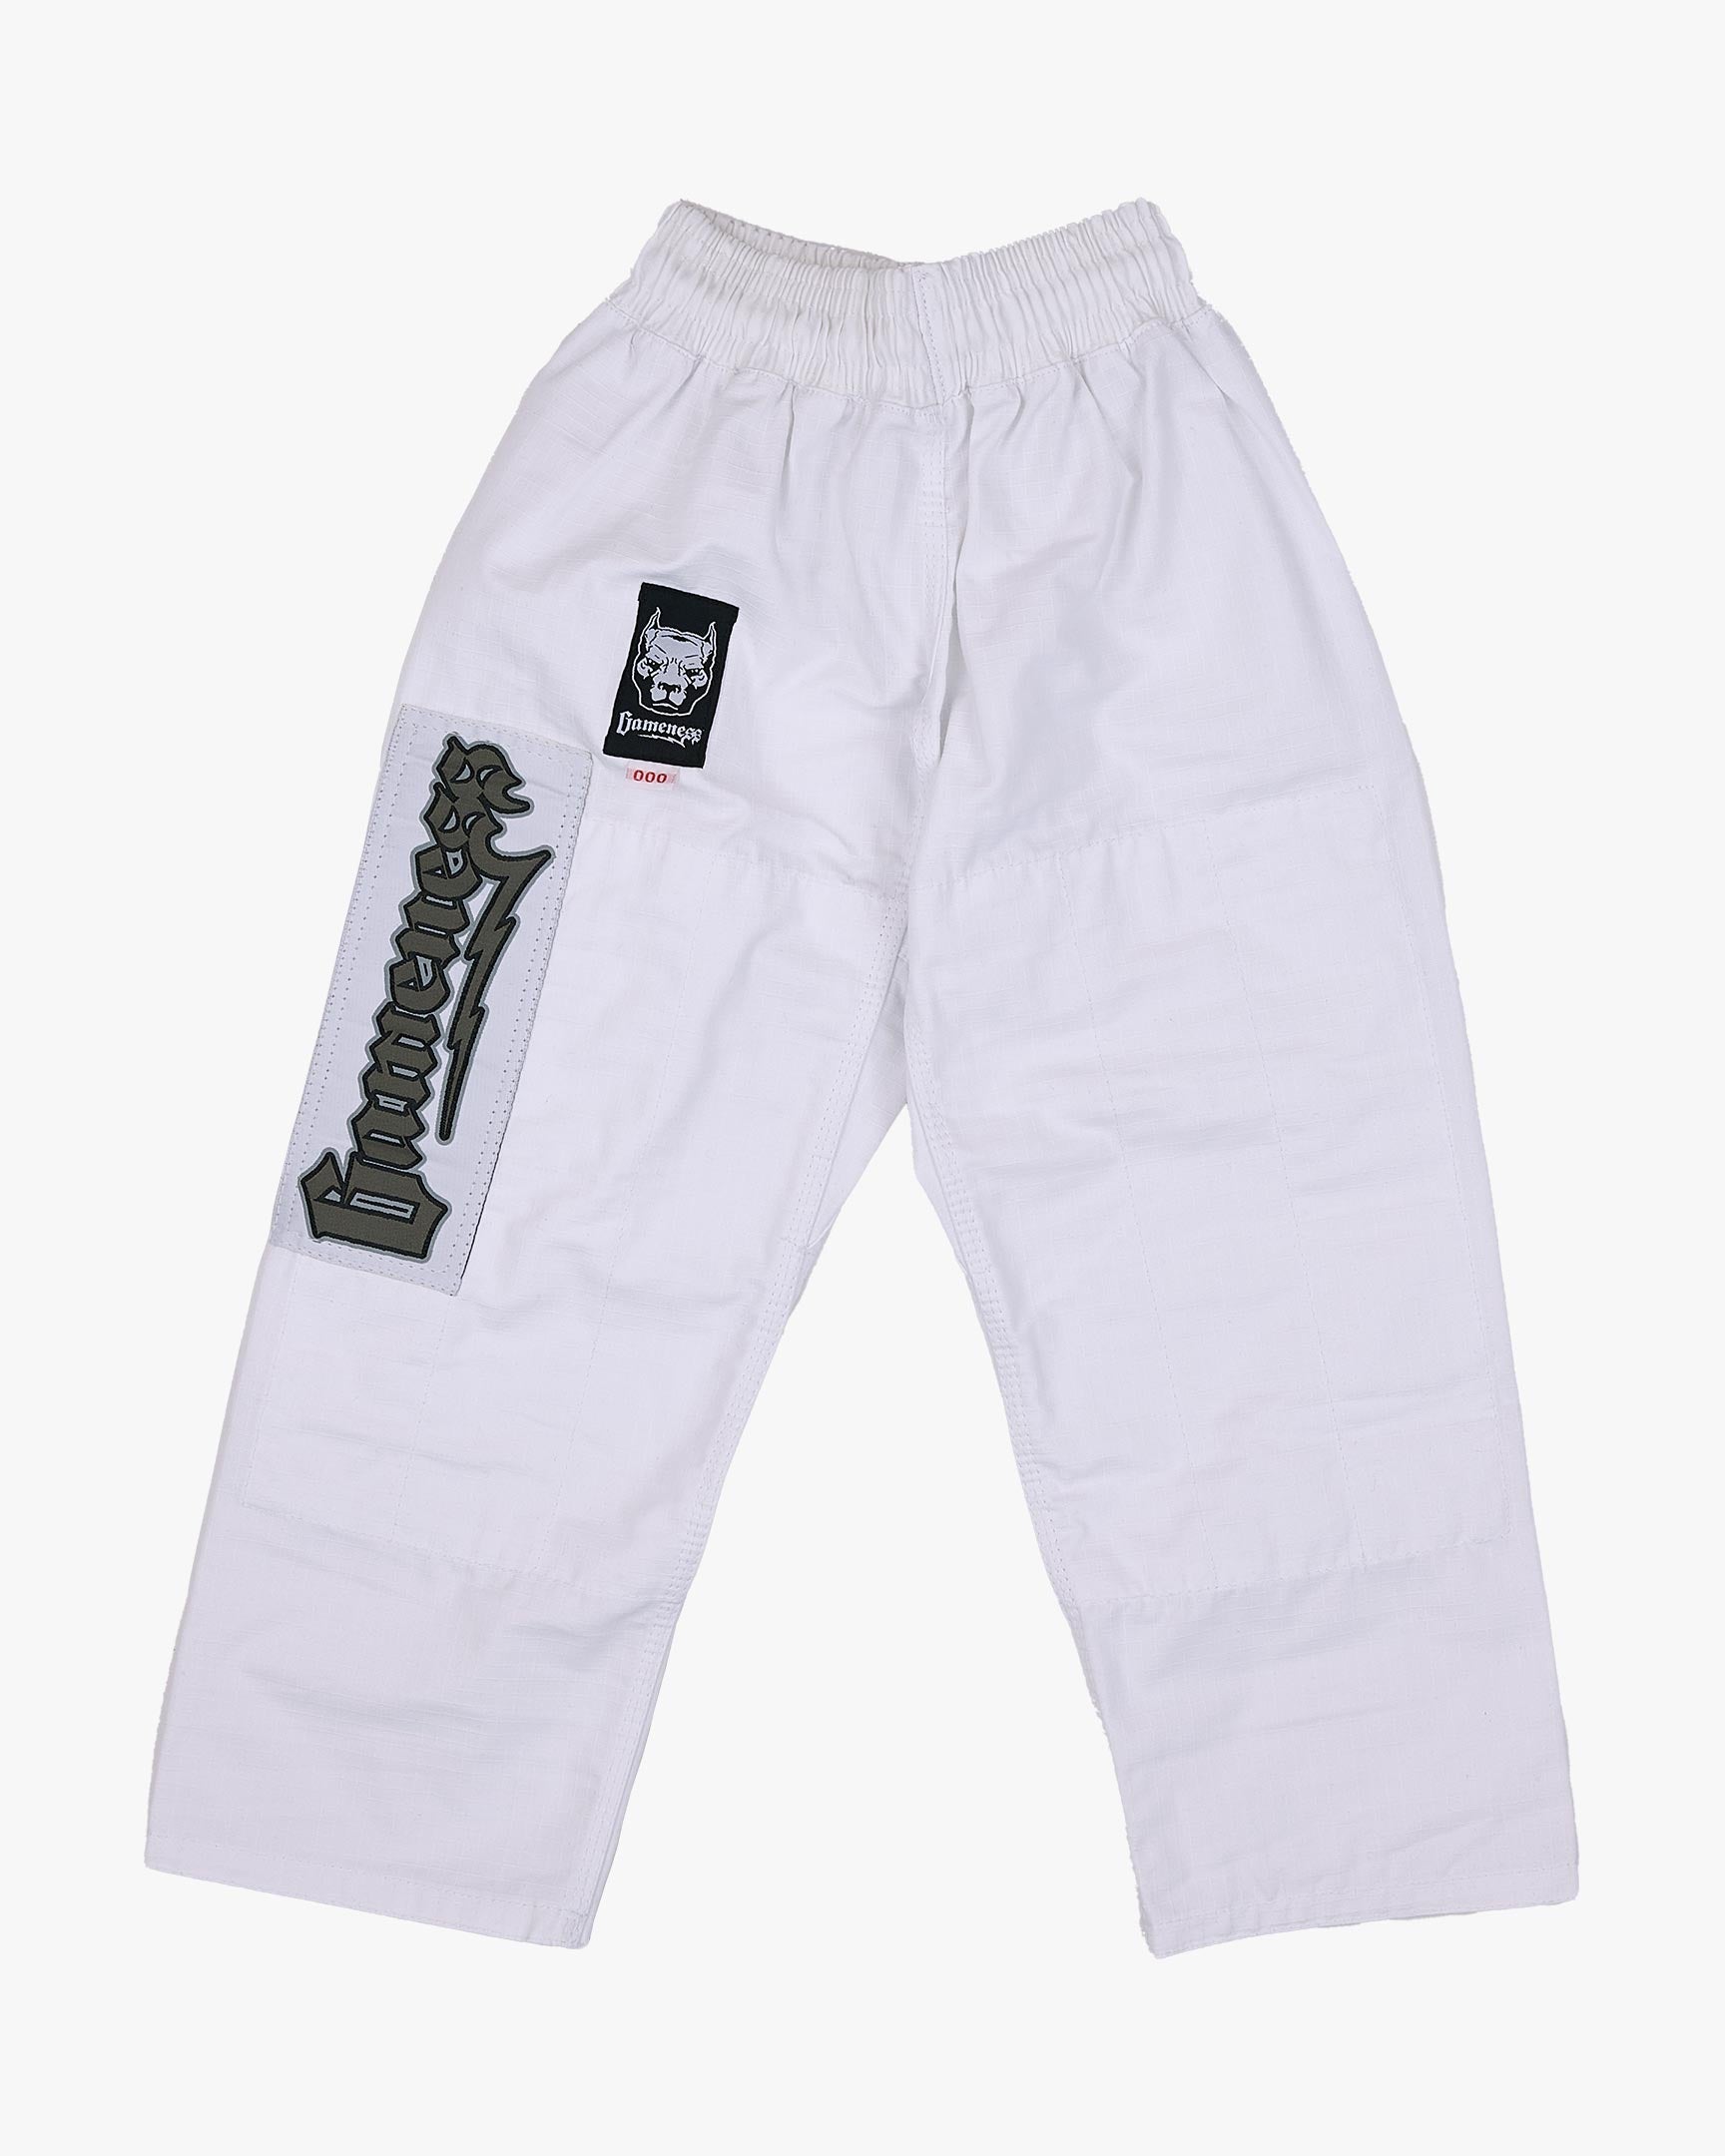 GB Fitted Gi Pants  White  GB Wear